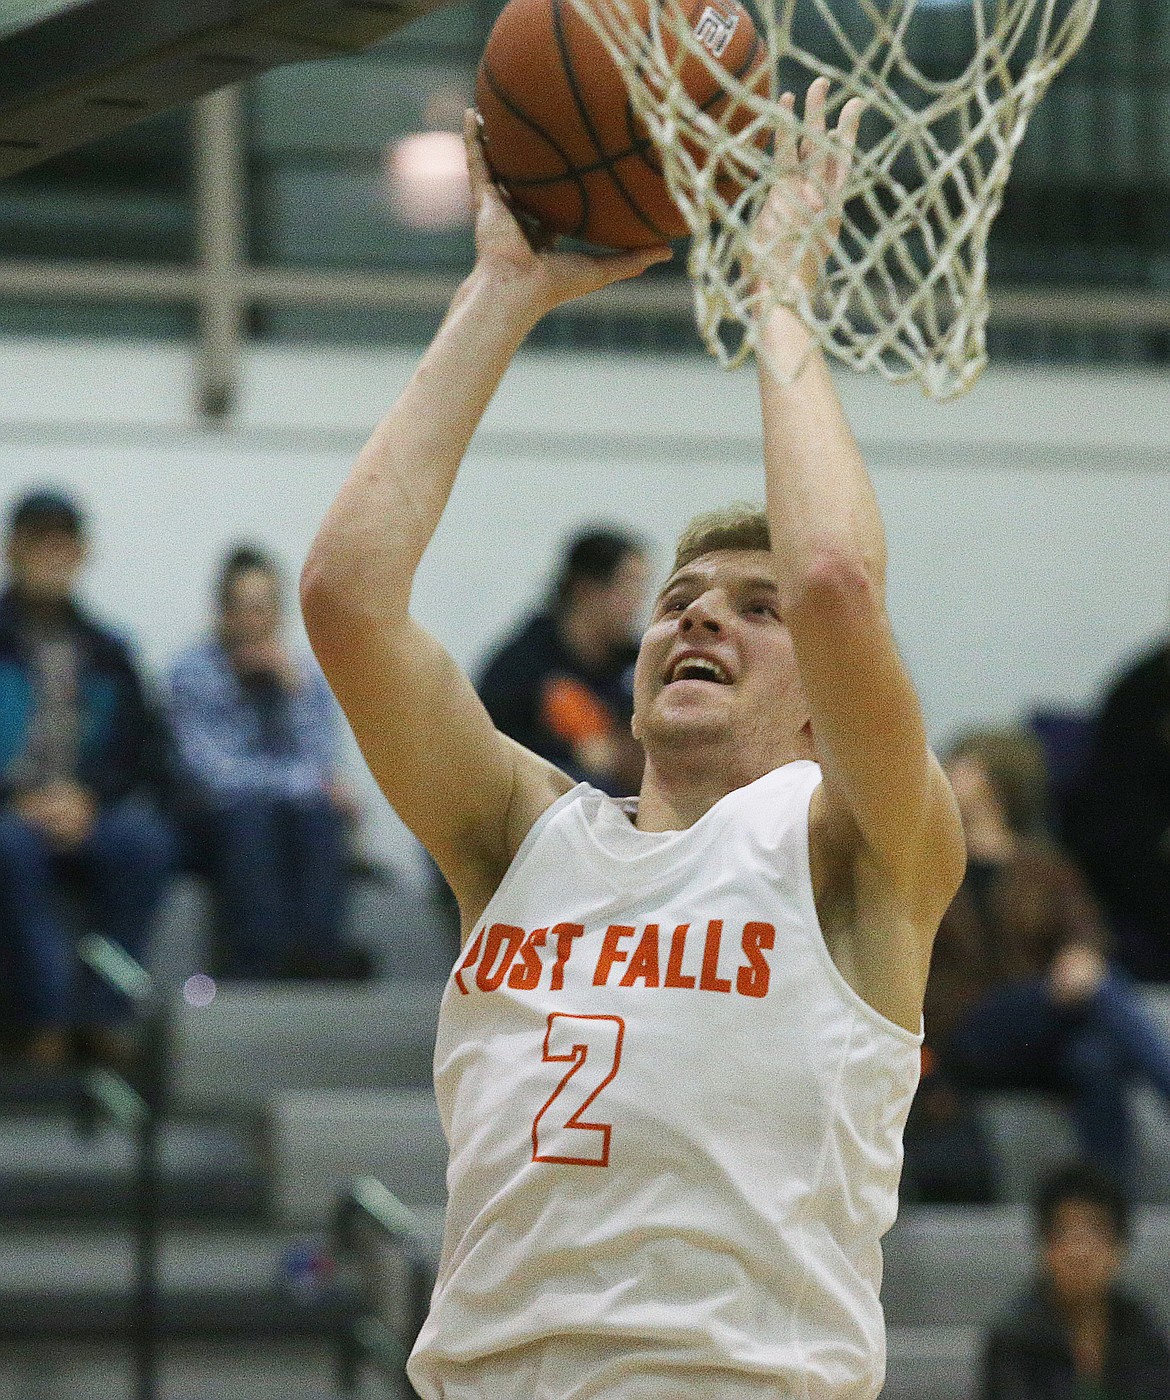 Post Falls guard Colby Gennett goes for a layup in Friday night's game against Rogers at Post Falls High School. (LOREN BENOIT/Press)